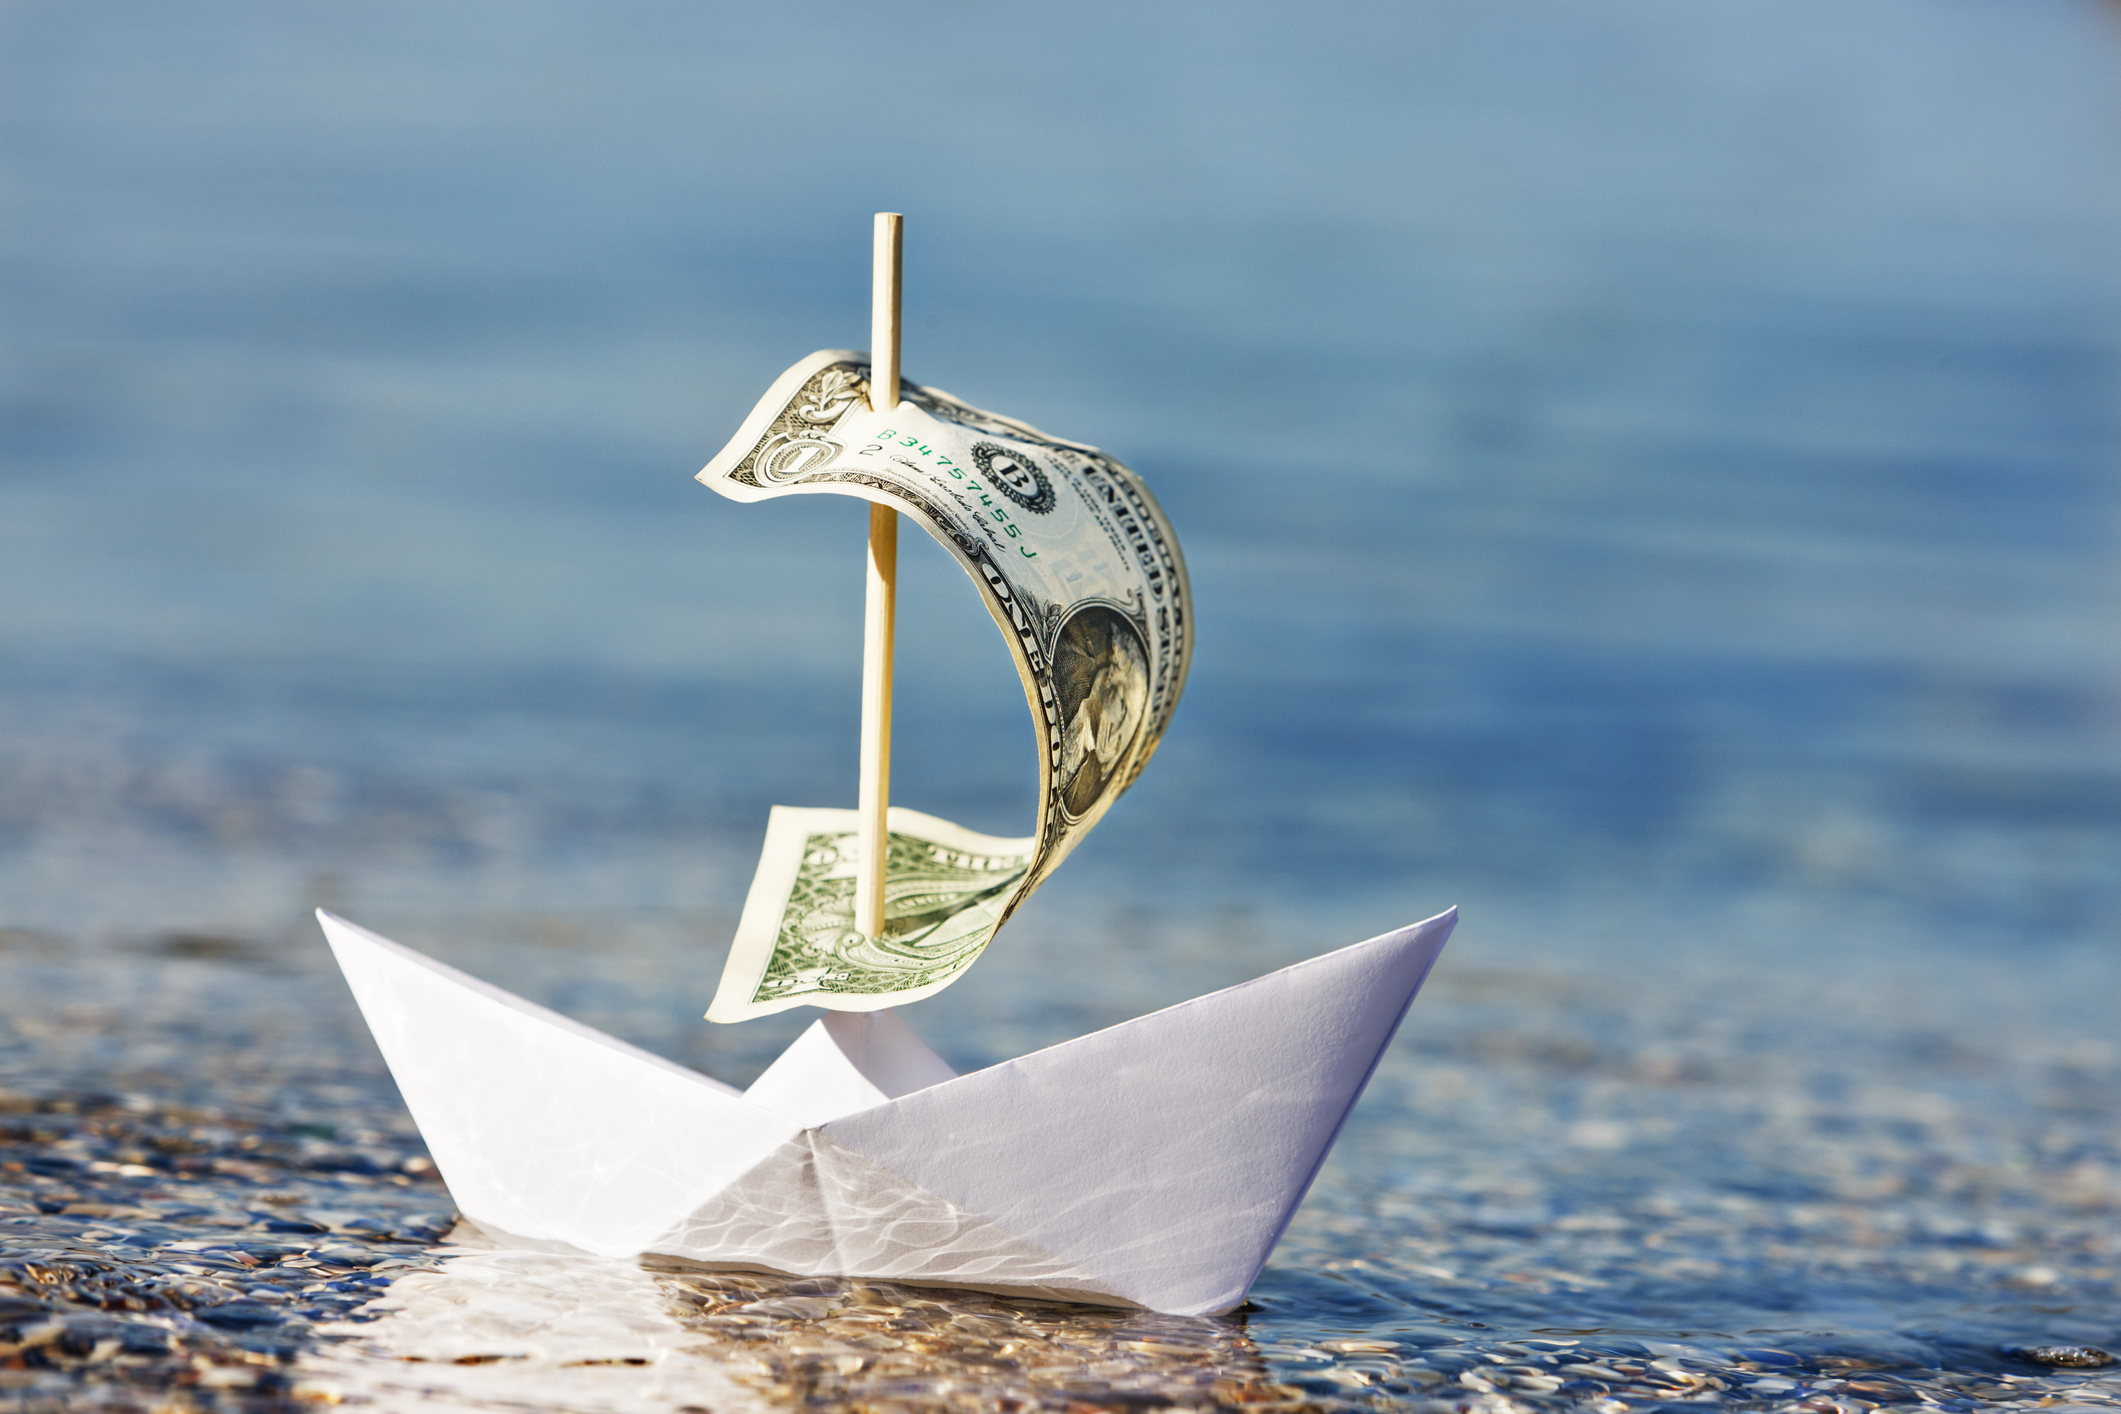 Paper boat with $1 bill sail is blown onshore